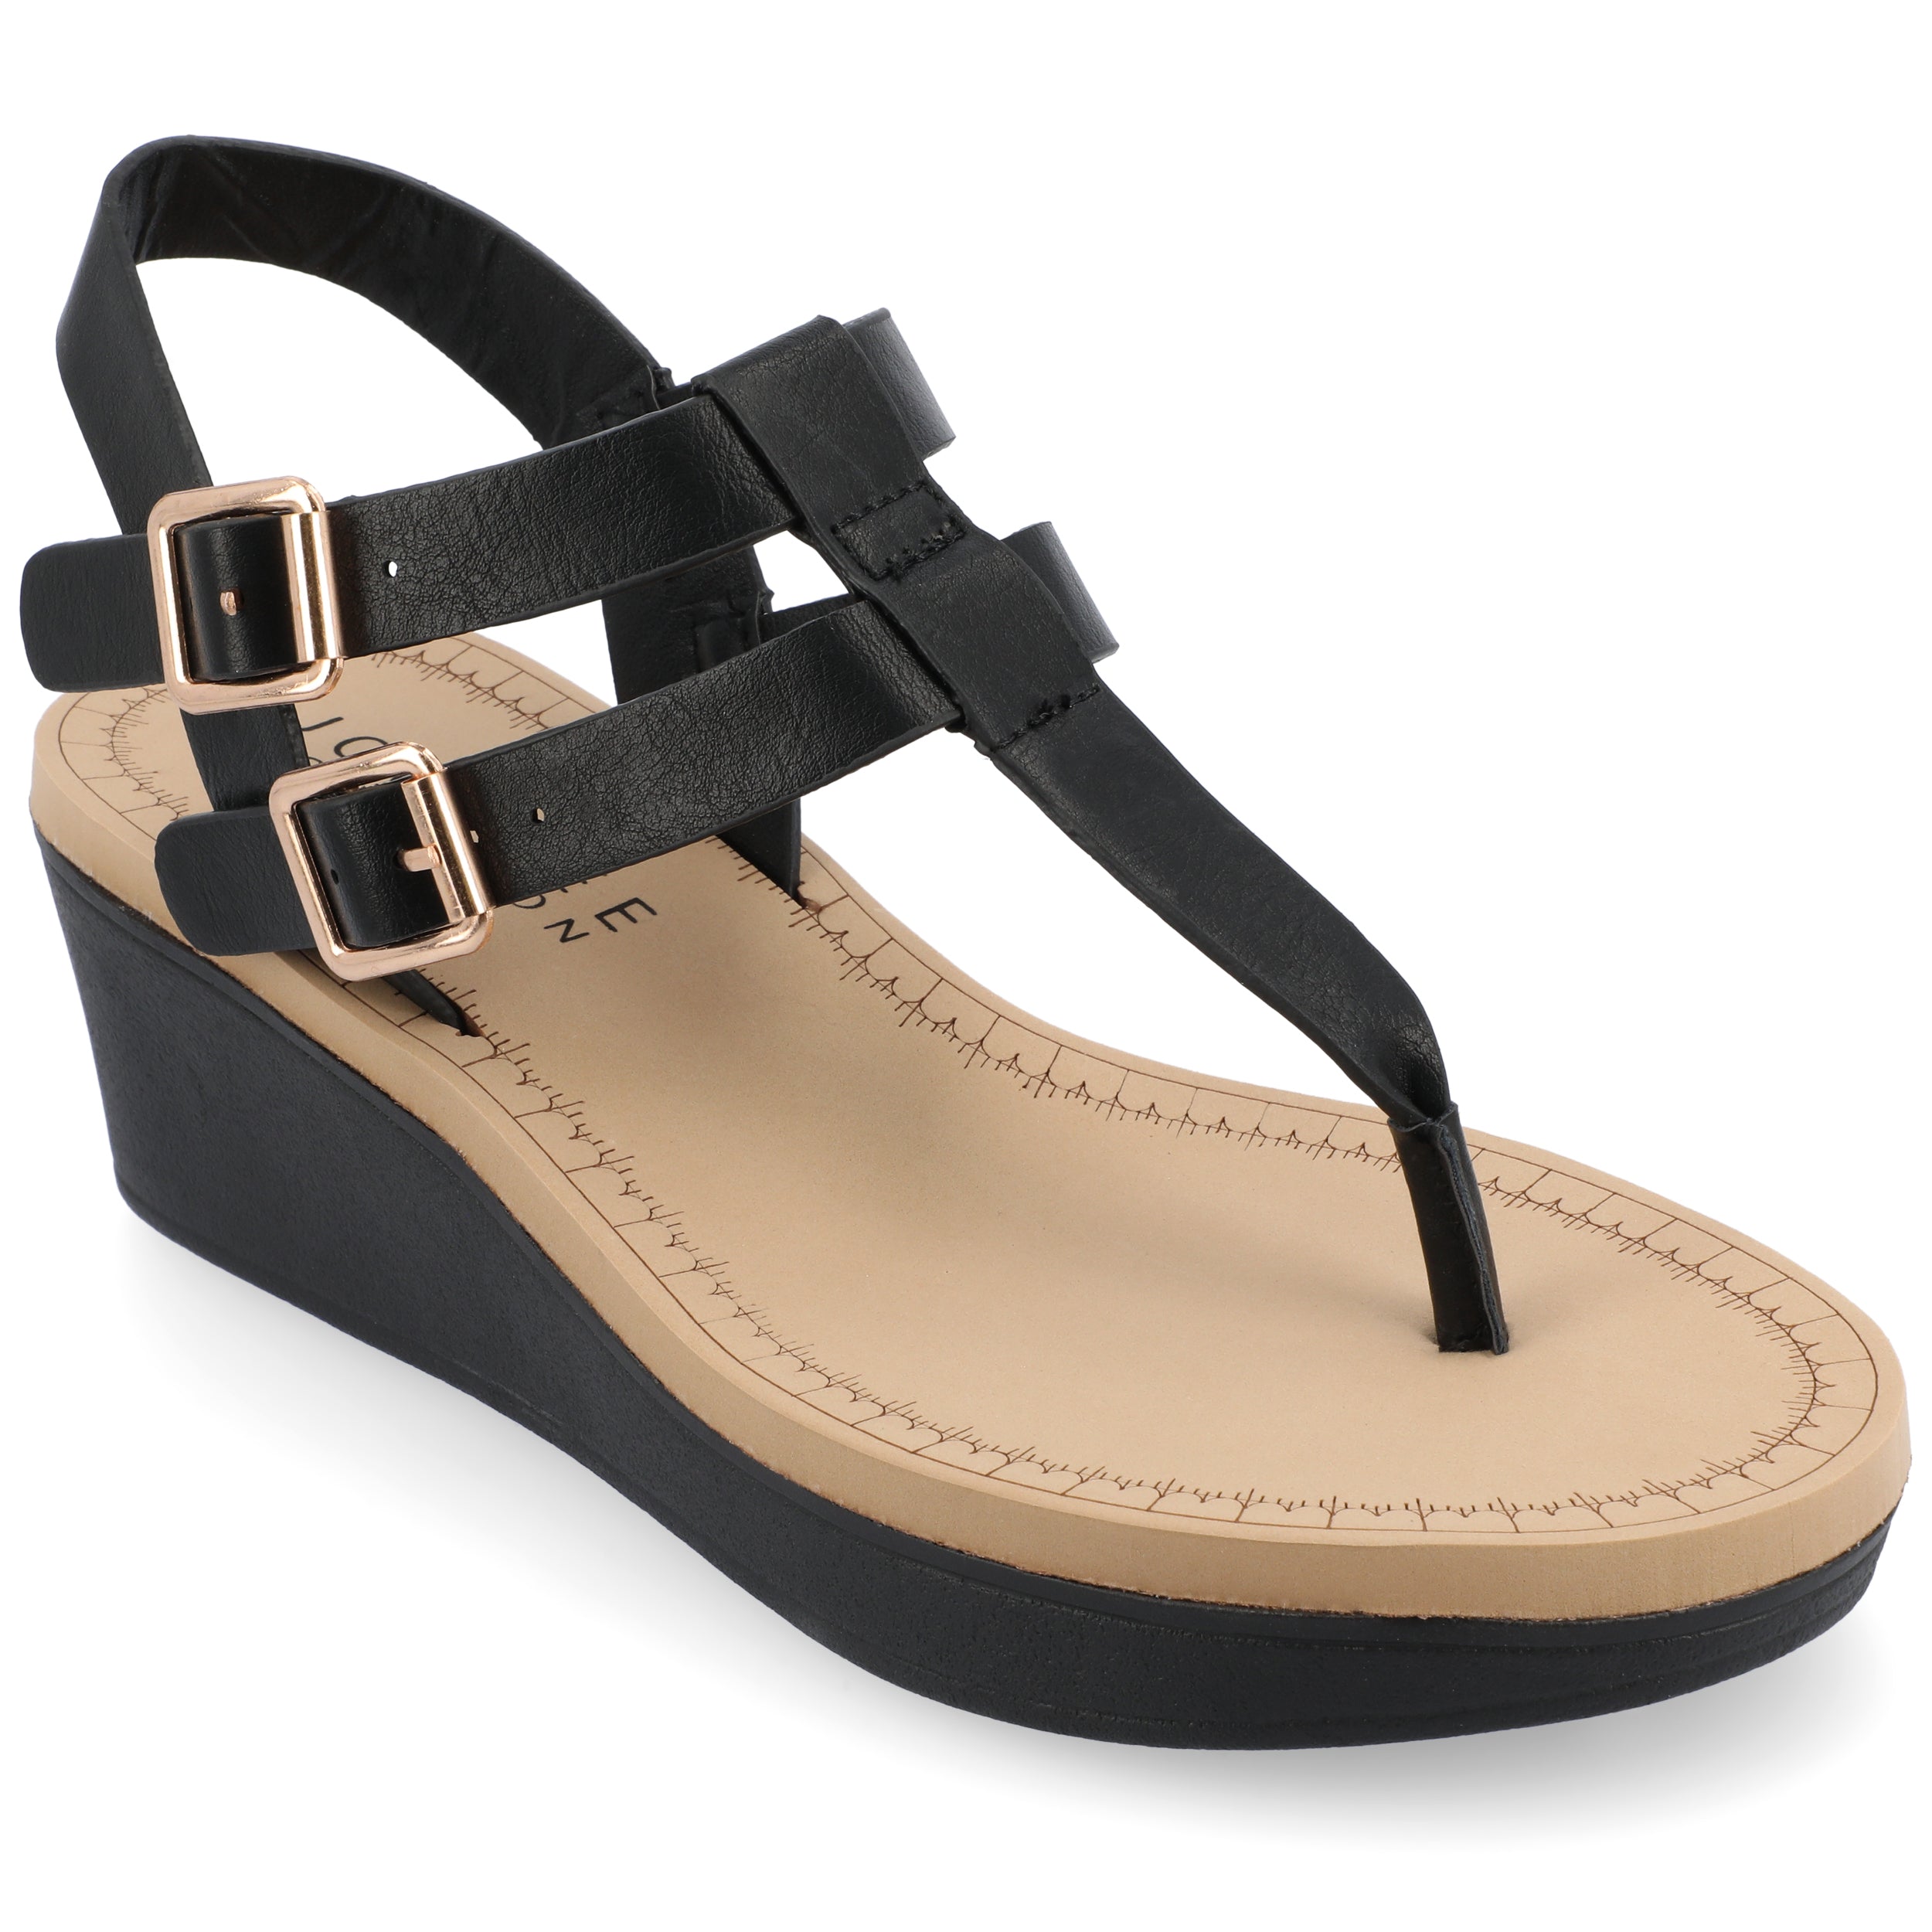 Wedge Sandal Designs - 25 Latest Collection for Trending Look